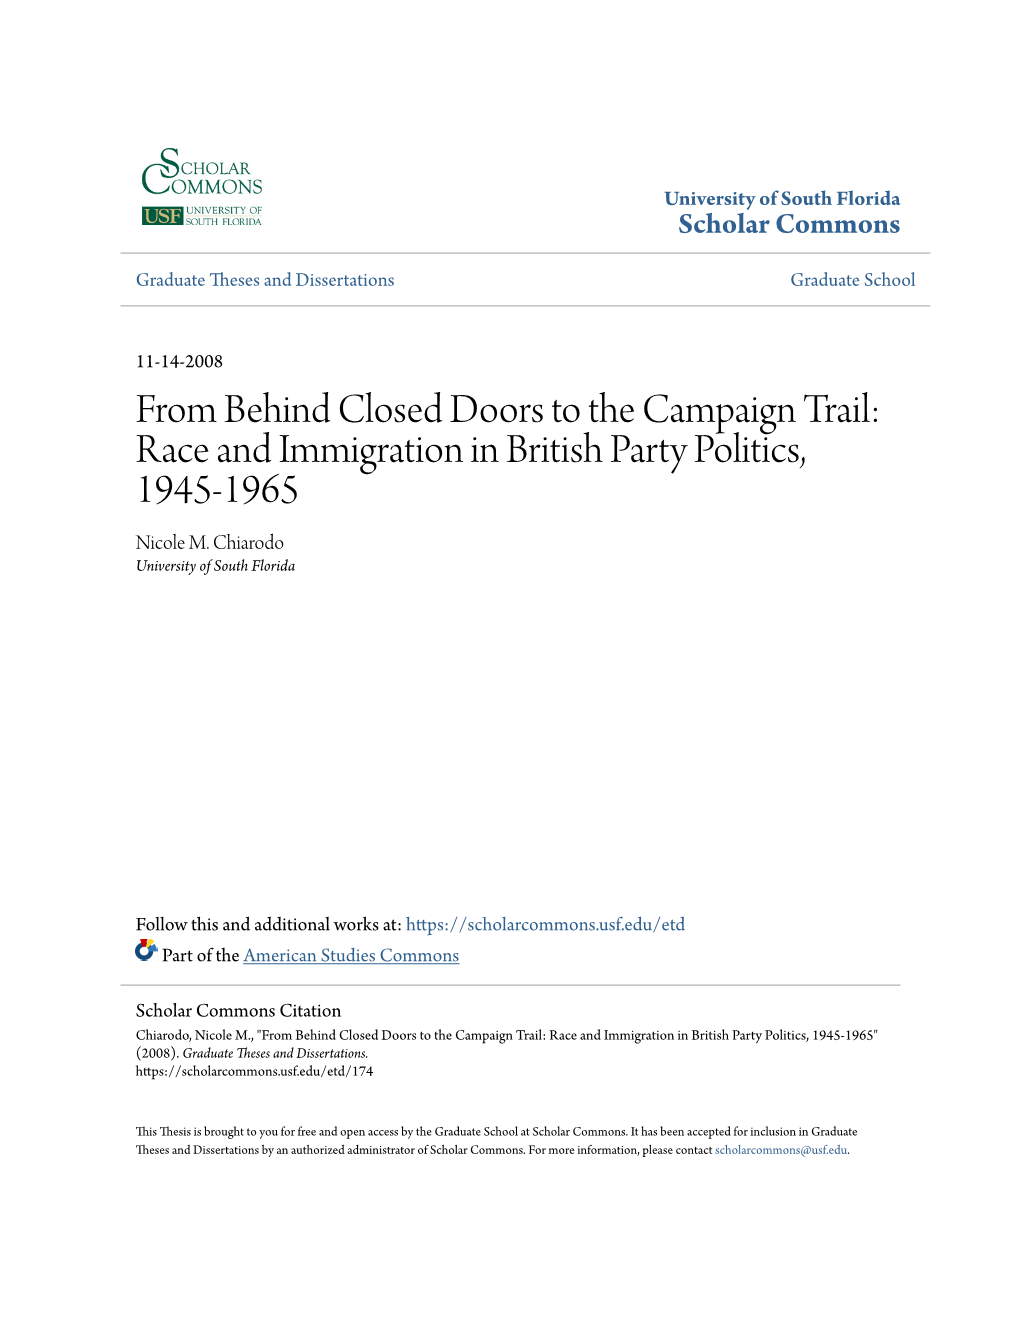 From Behind Closed Doors to the Campaign Trail: Race and Immigration in British Party Politics, 1945-1965 Nicole M